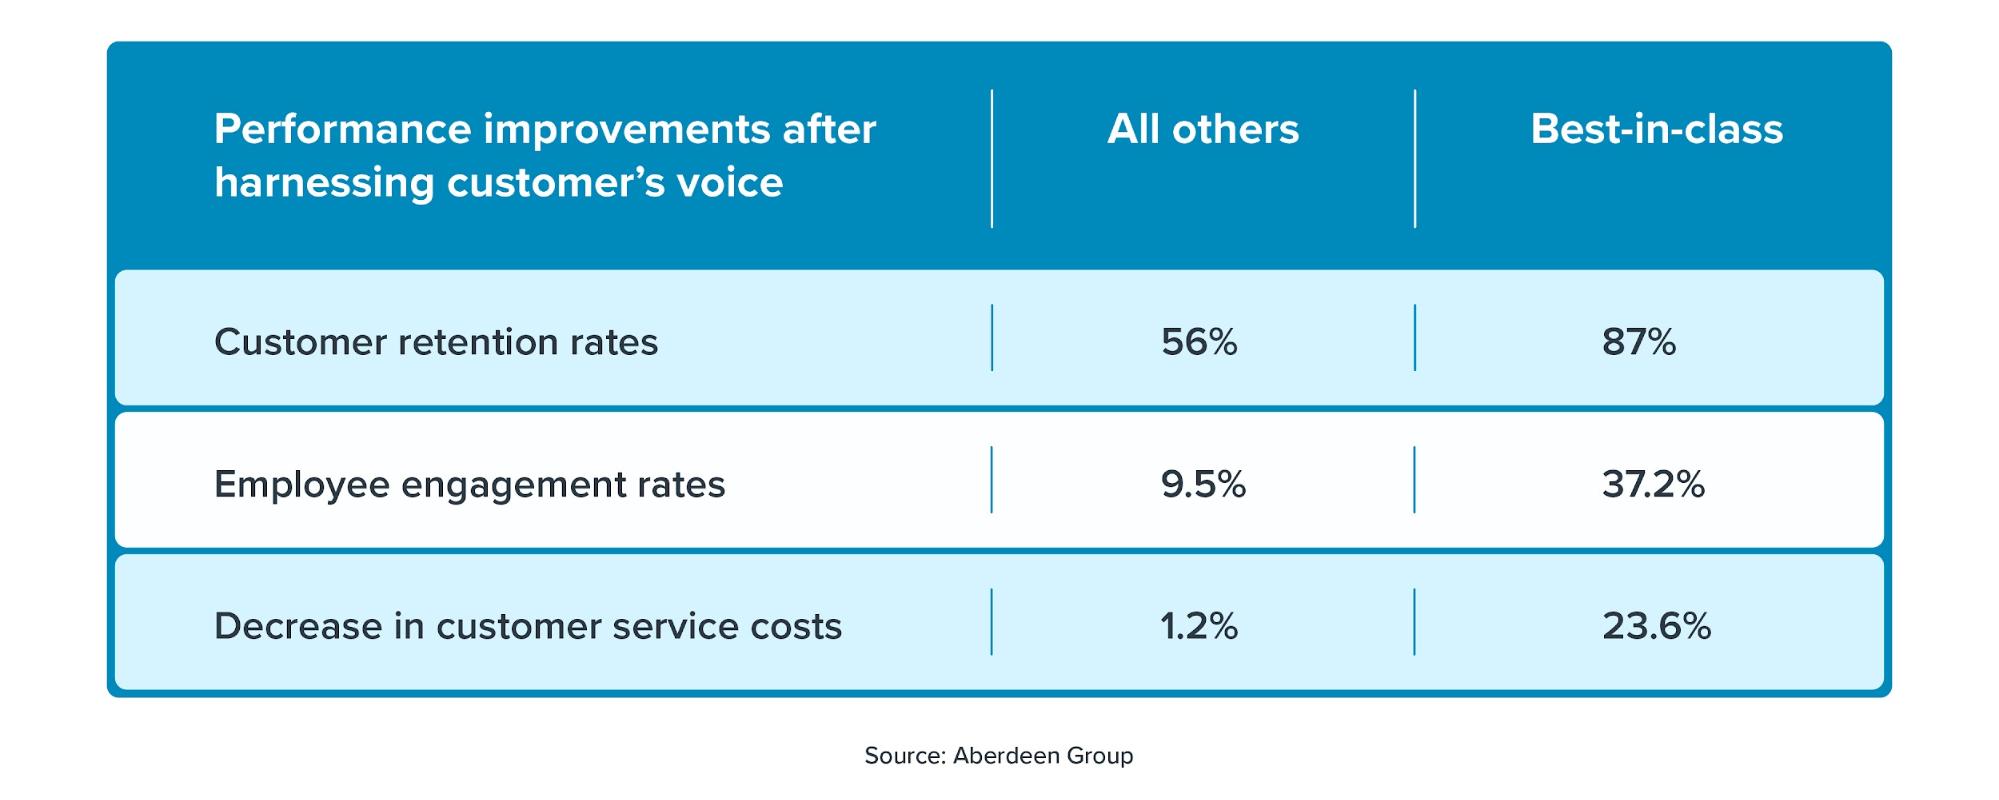 Performance improvements after harnessing customer's voice.